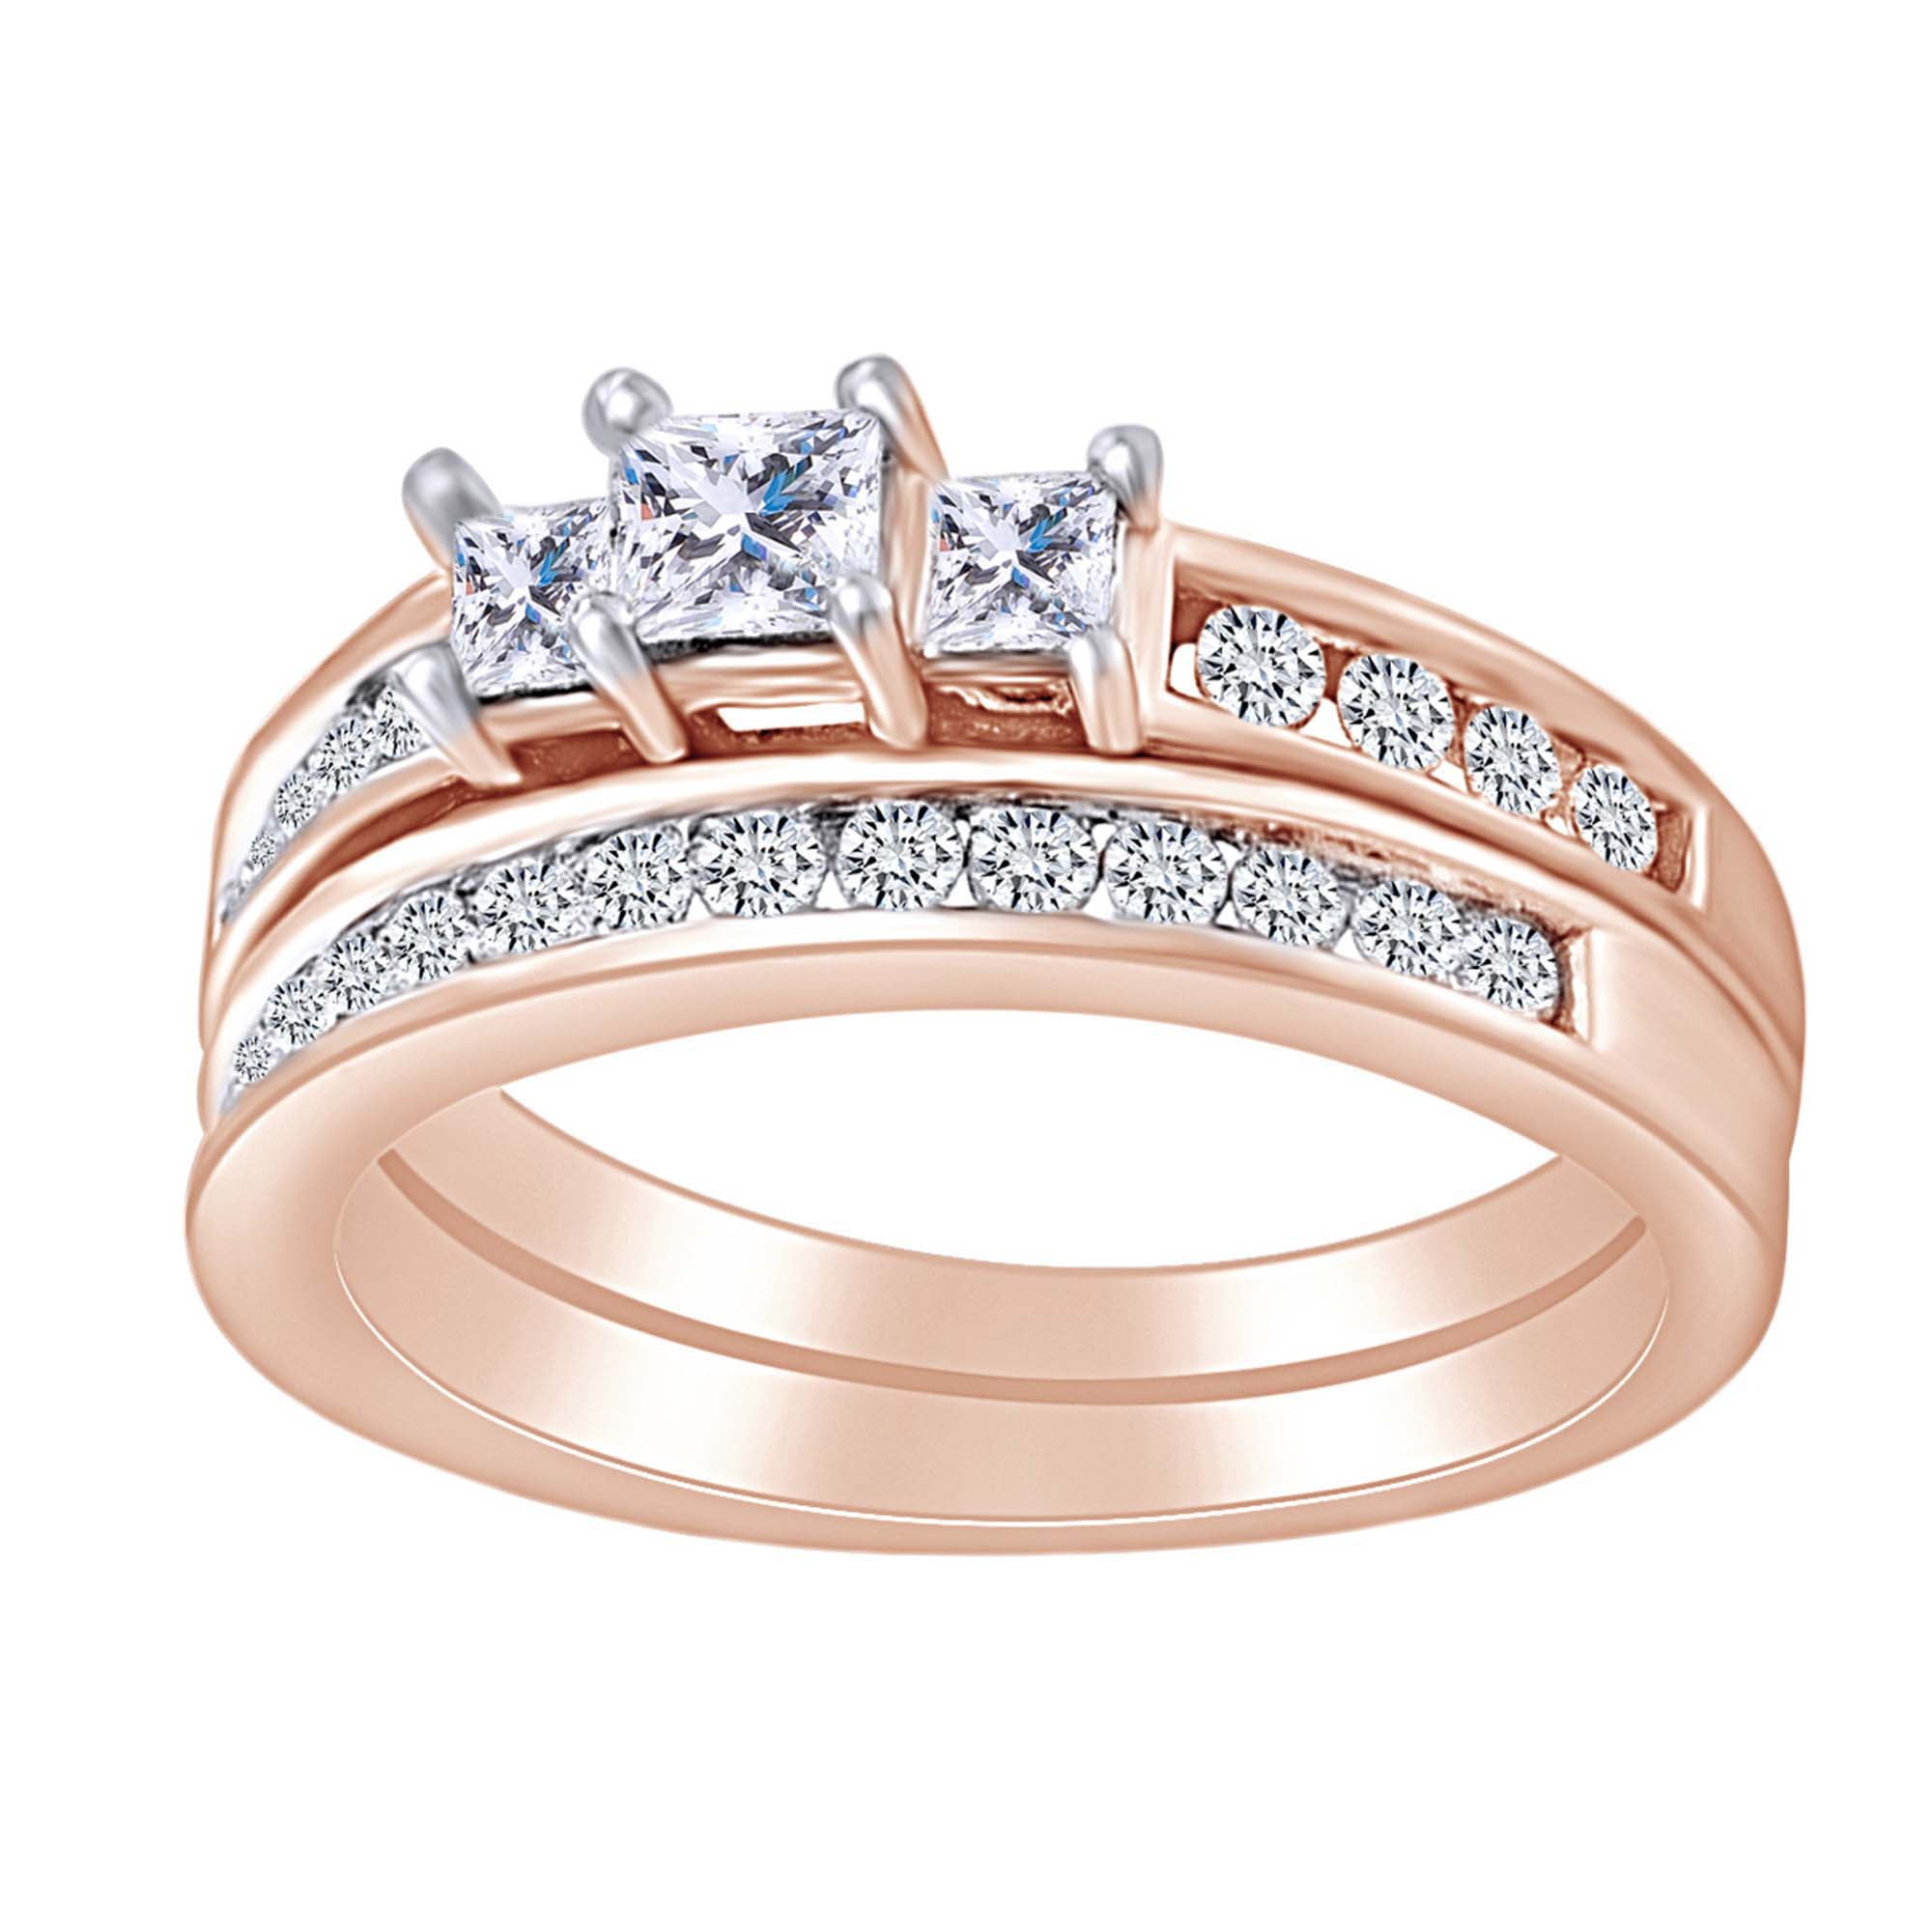 1/10 cttw, Size-3 G-H,I2-I3 Diamond Wedding Band in 14K Pink Gold